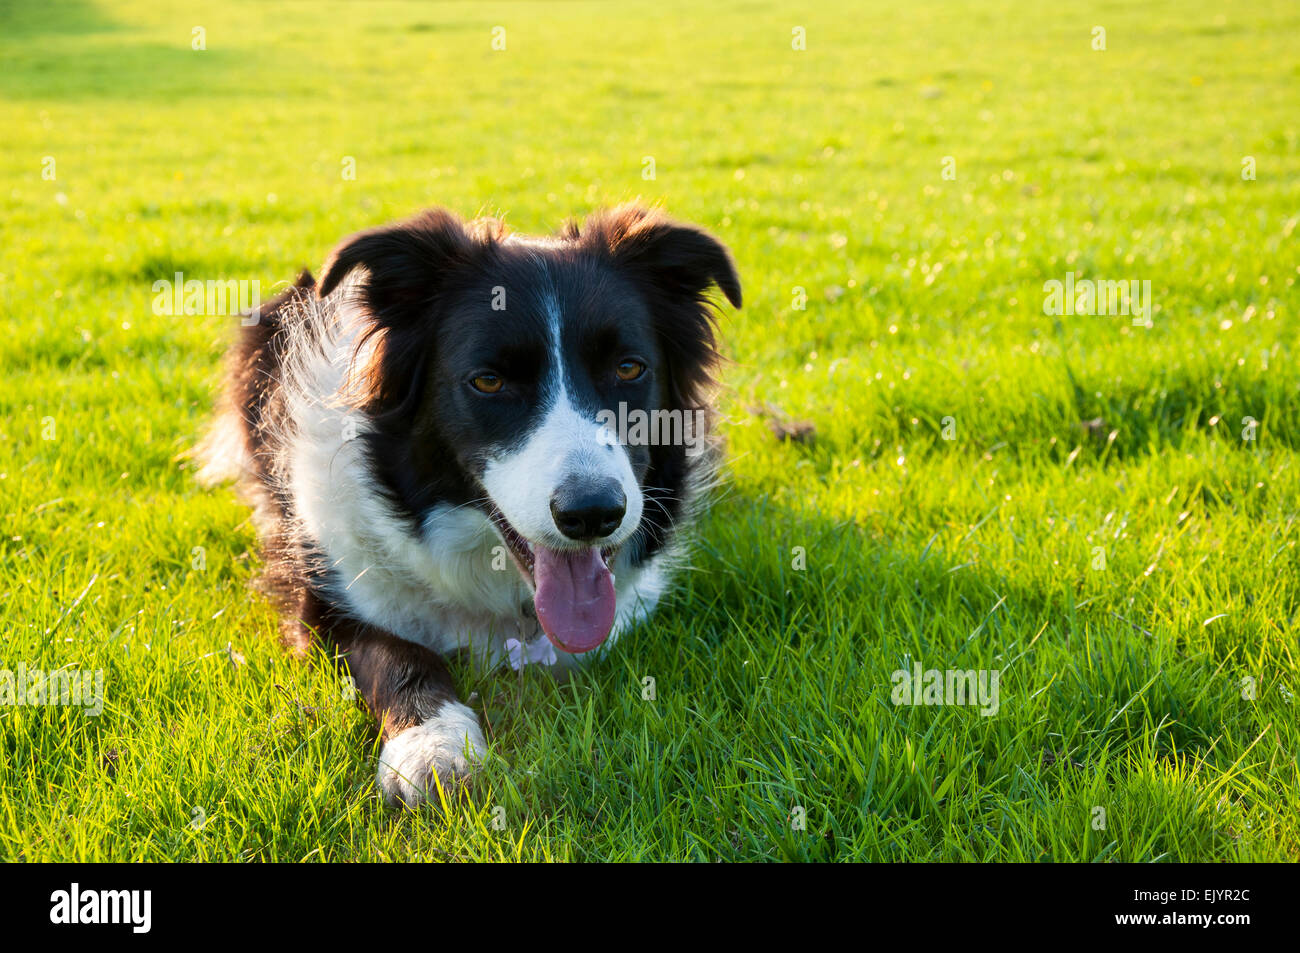 A panting Border Collie dog in a field with green grass in warm afternoon sunlight. Stock Photo